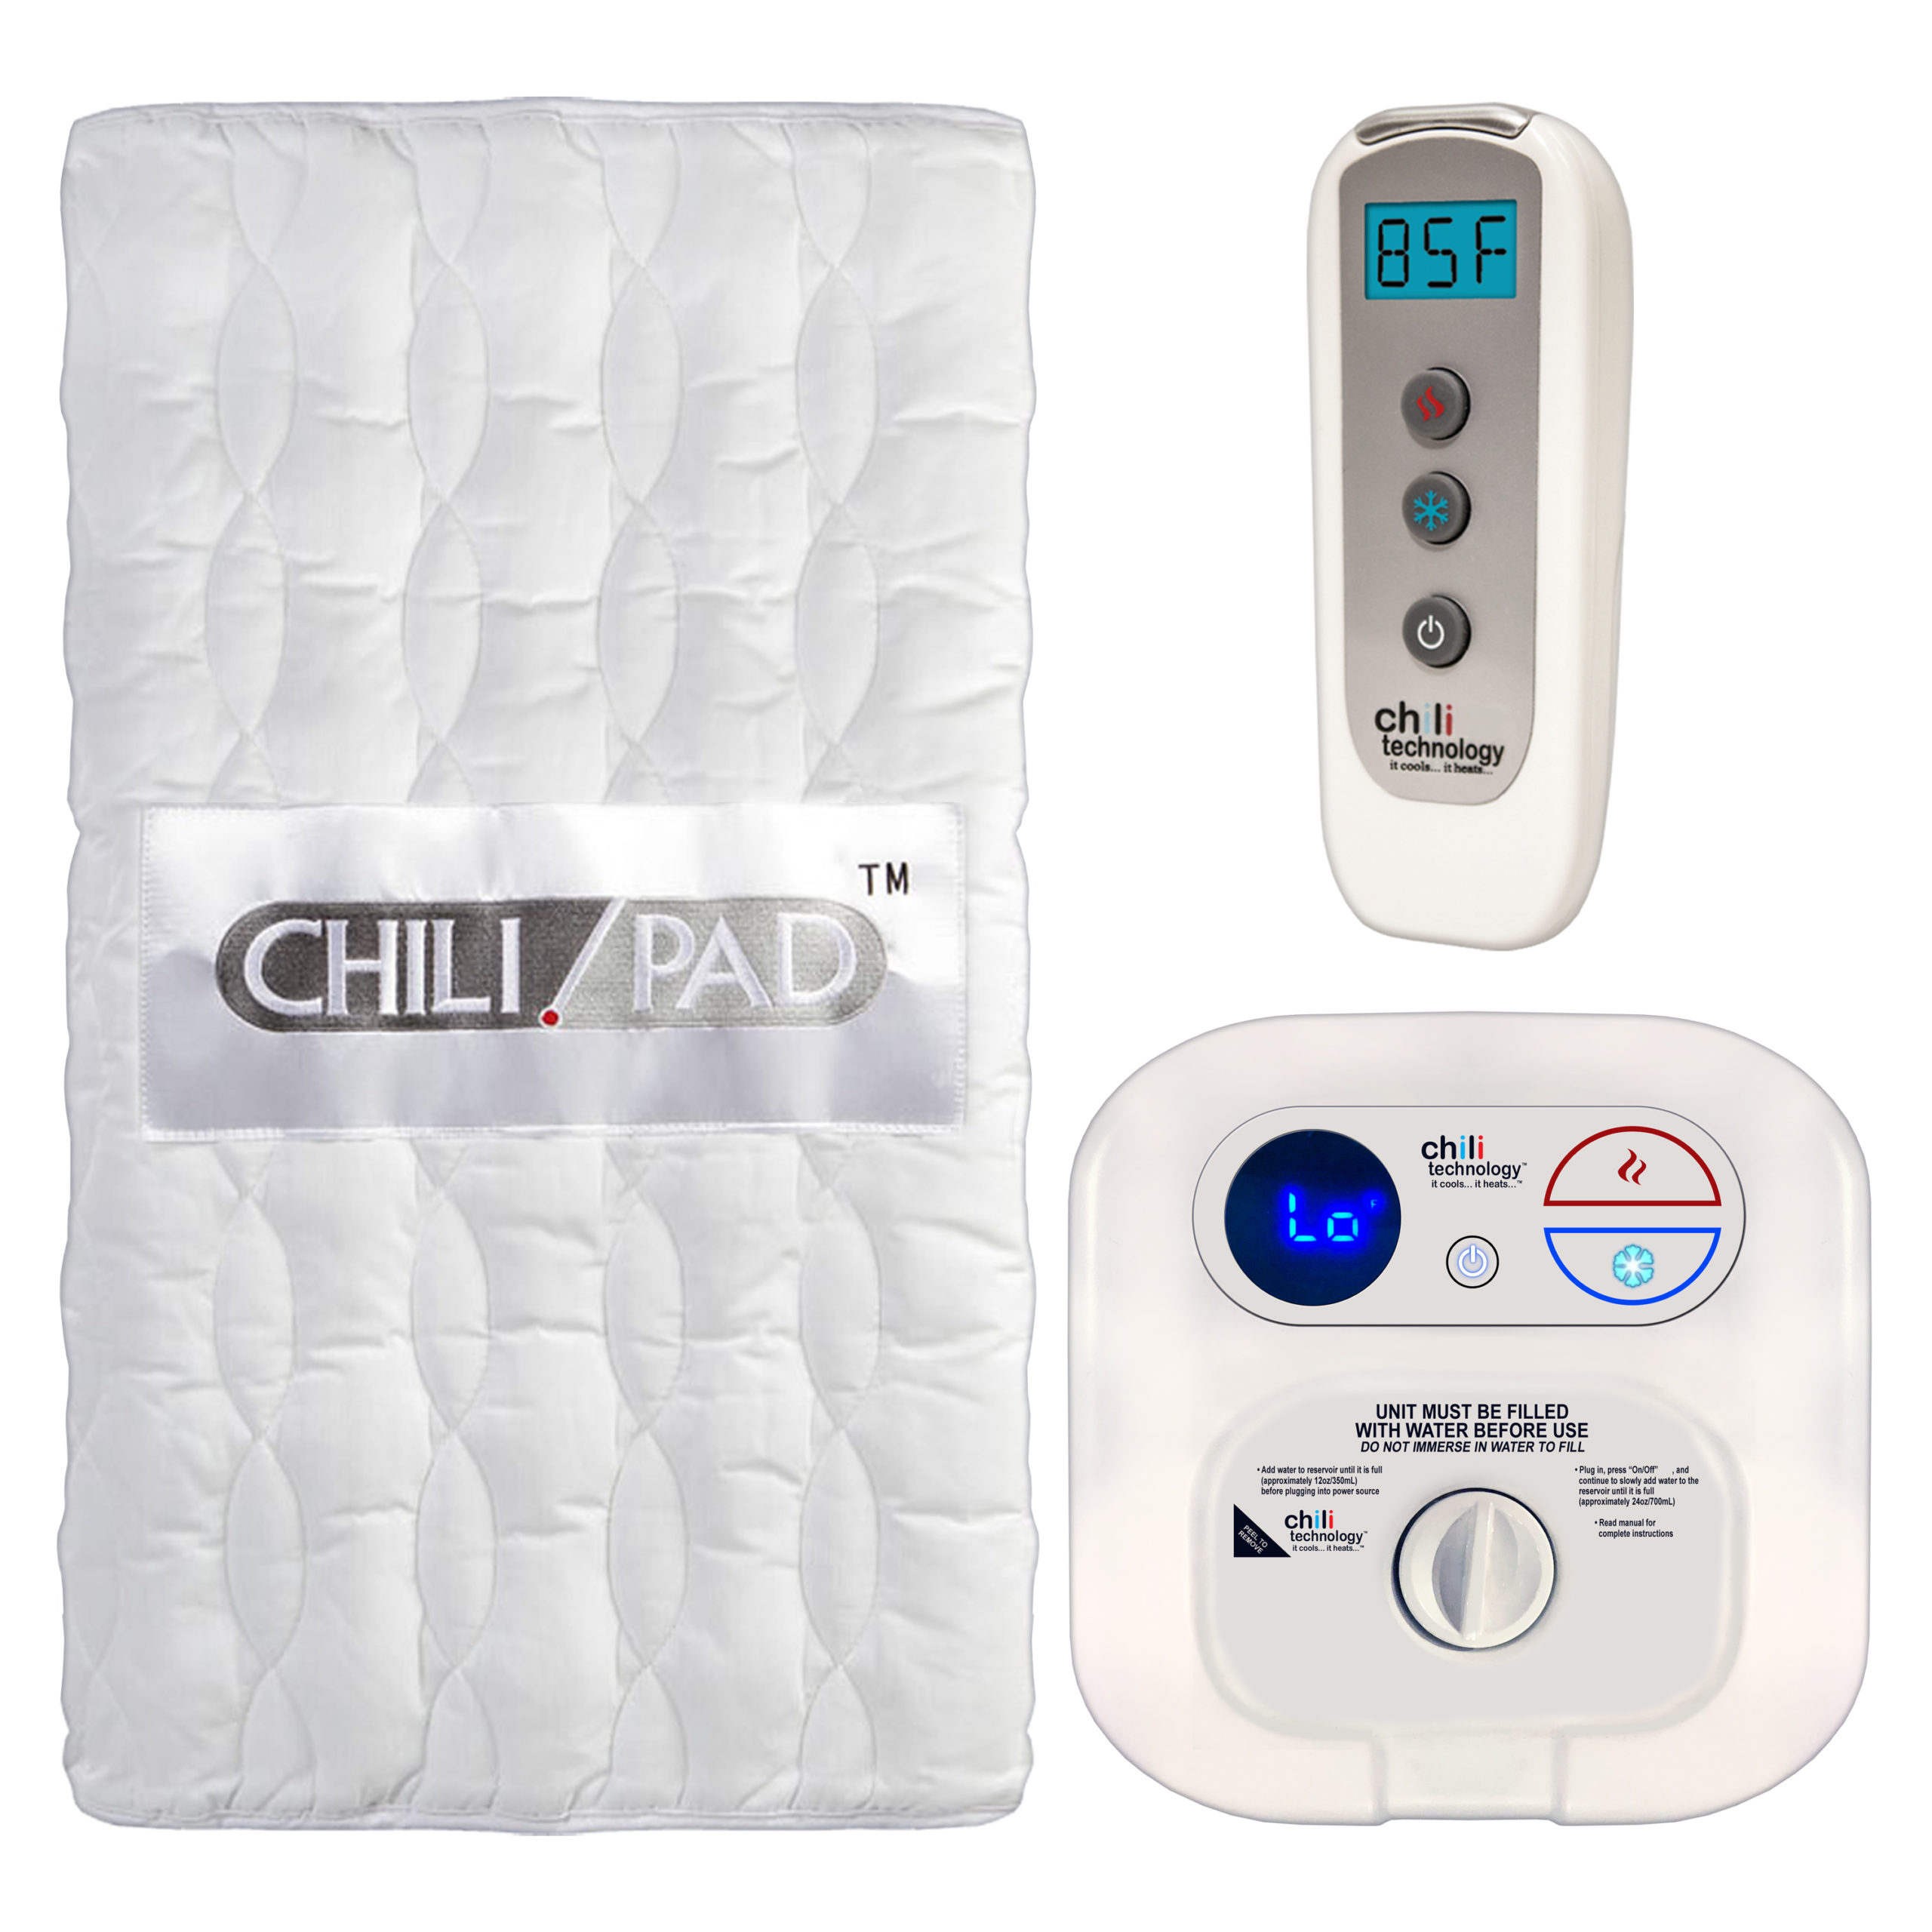 Mattress Pad Double - Chilipad|Temperature|Mattress|Cube|Sleep|Bed|Water|System|Pad|Ooler|Control|Unit|Night|Bedjet|Technology|Side|Air|Product|Review|Body|Time|Degrees|Noise|Price|Pod|Tubes|Heat|Device|Cooling|Room|King|App|Features|Size|Cover|Sleepers|Sheets|Energy|Warranty|Quality|Mattress Pad|Control Unit|Cube Sleep System|Sleep Pod|Distilled Water|Remote Control|Sleep System|Desired Temperature|Water Tank|Chilipad Cube|Chili Technology|Deep Sleep|Pro Cover|Ooler Sleep System|Hydrogen Peroxide|Cool Mesh|Sleep Temperature|Fitted Sheet|Pod Pro|Sleep Quality|Smartphone App|Sleep Systems|Chilipad Sleep System|New Mattress|Sleep Trial|Full Refund|Mattress Topper|Body Heat|Air Flow|Chilipad Review